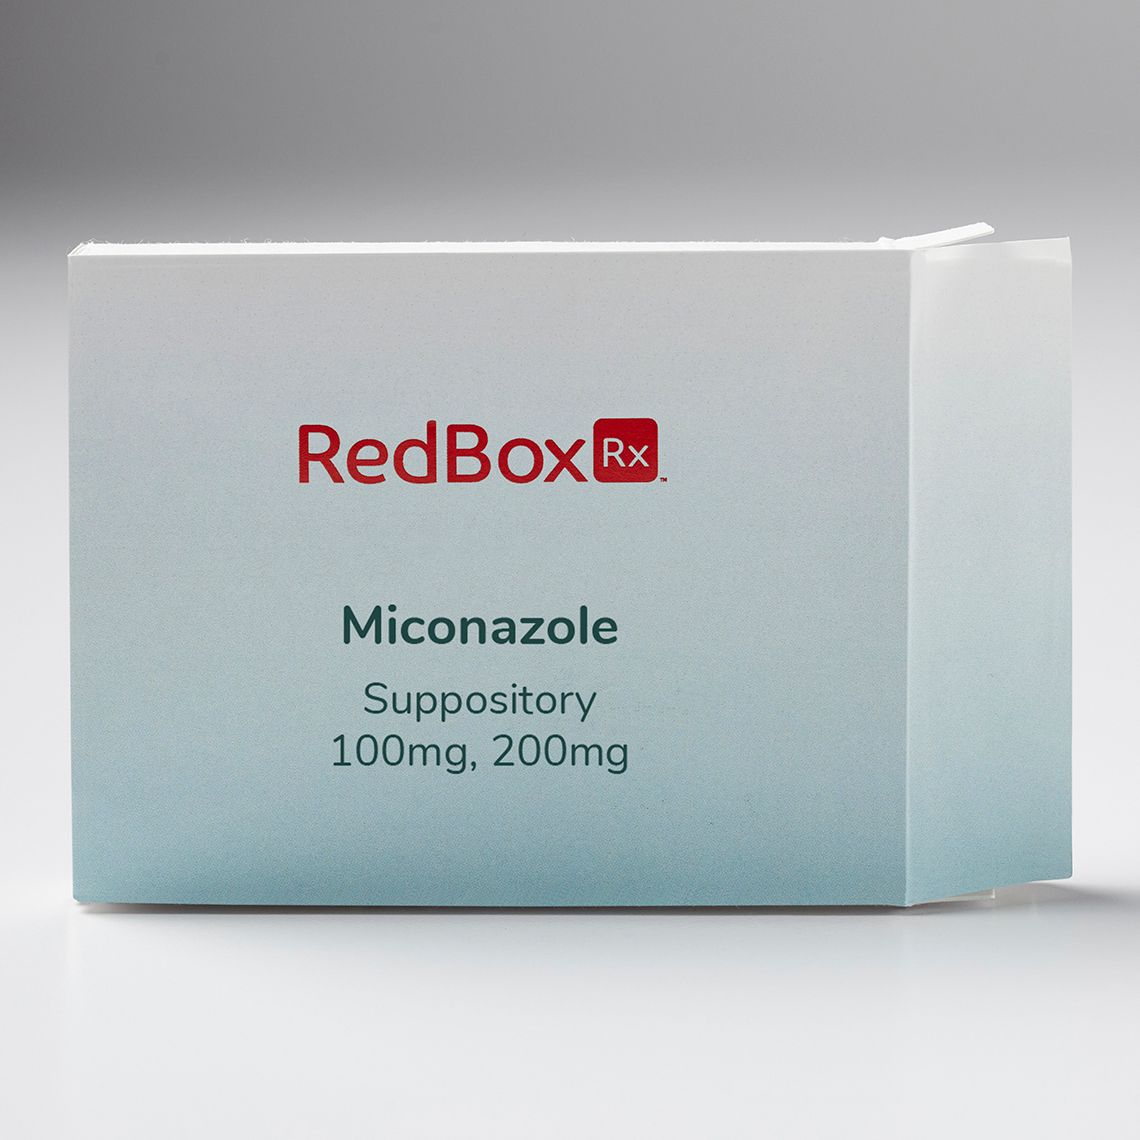 An image of miconazole vaginal suppository